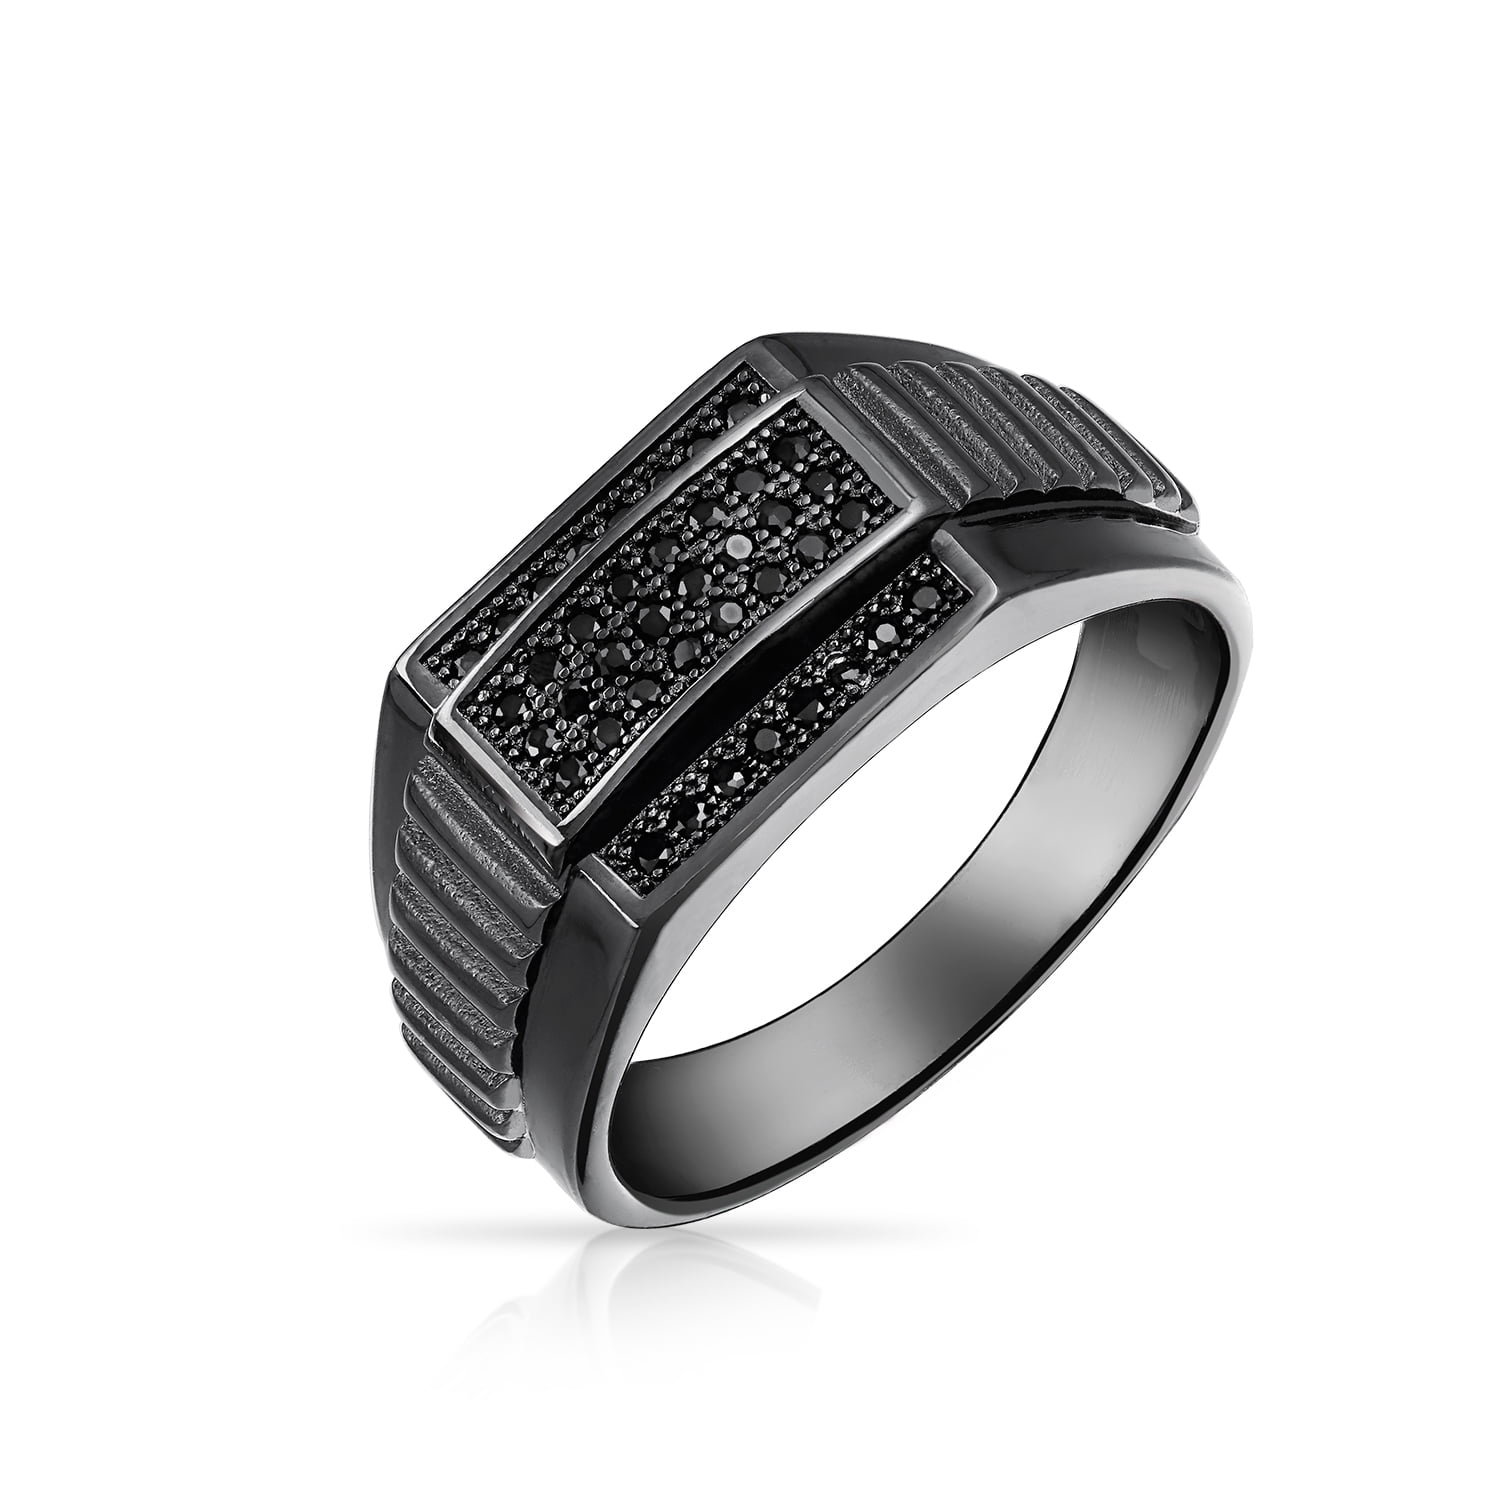 Black Enamel And CZ Stones Silver Rhodium Plated Ring Size 13 